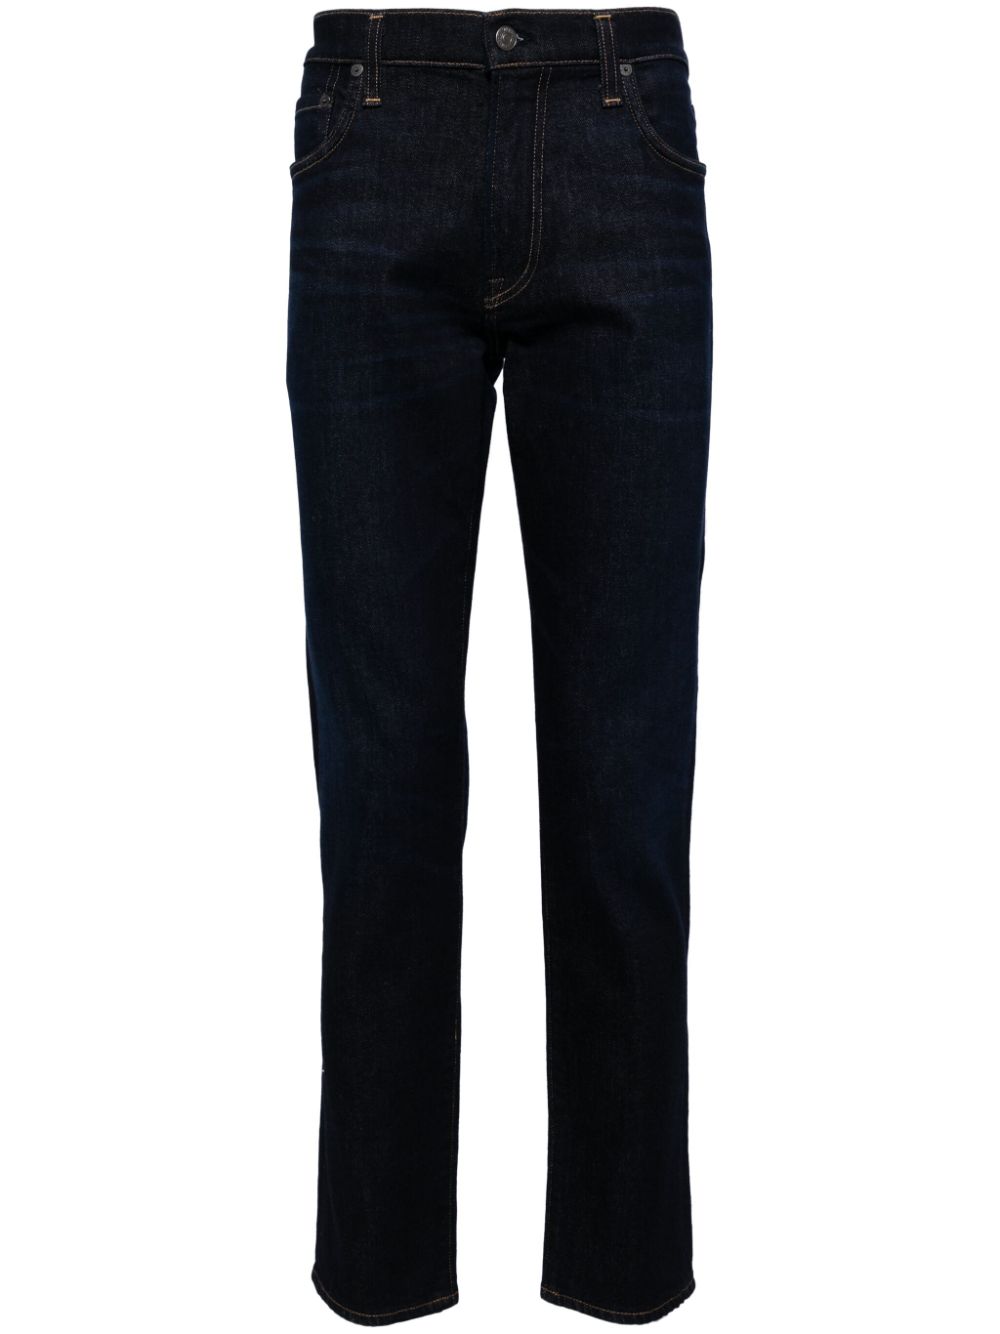 Citizens of Humanity London tapered slim-fit jeans - Blu